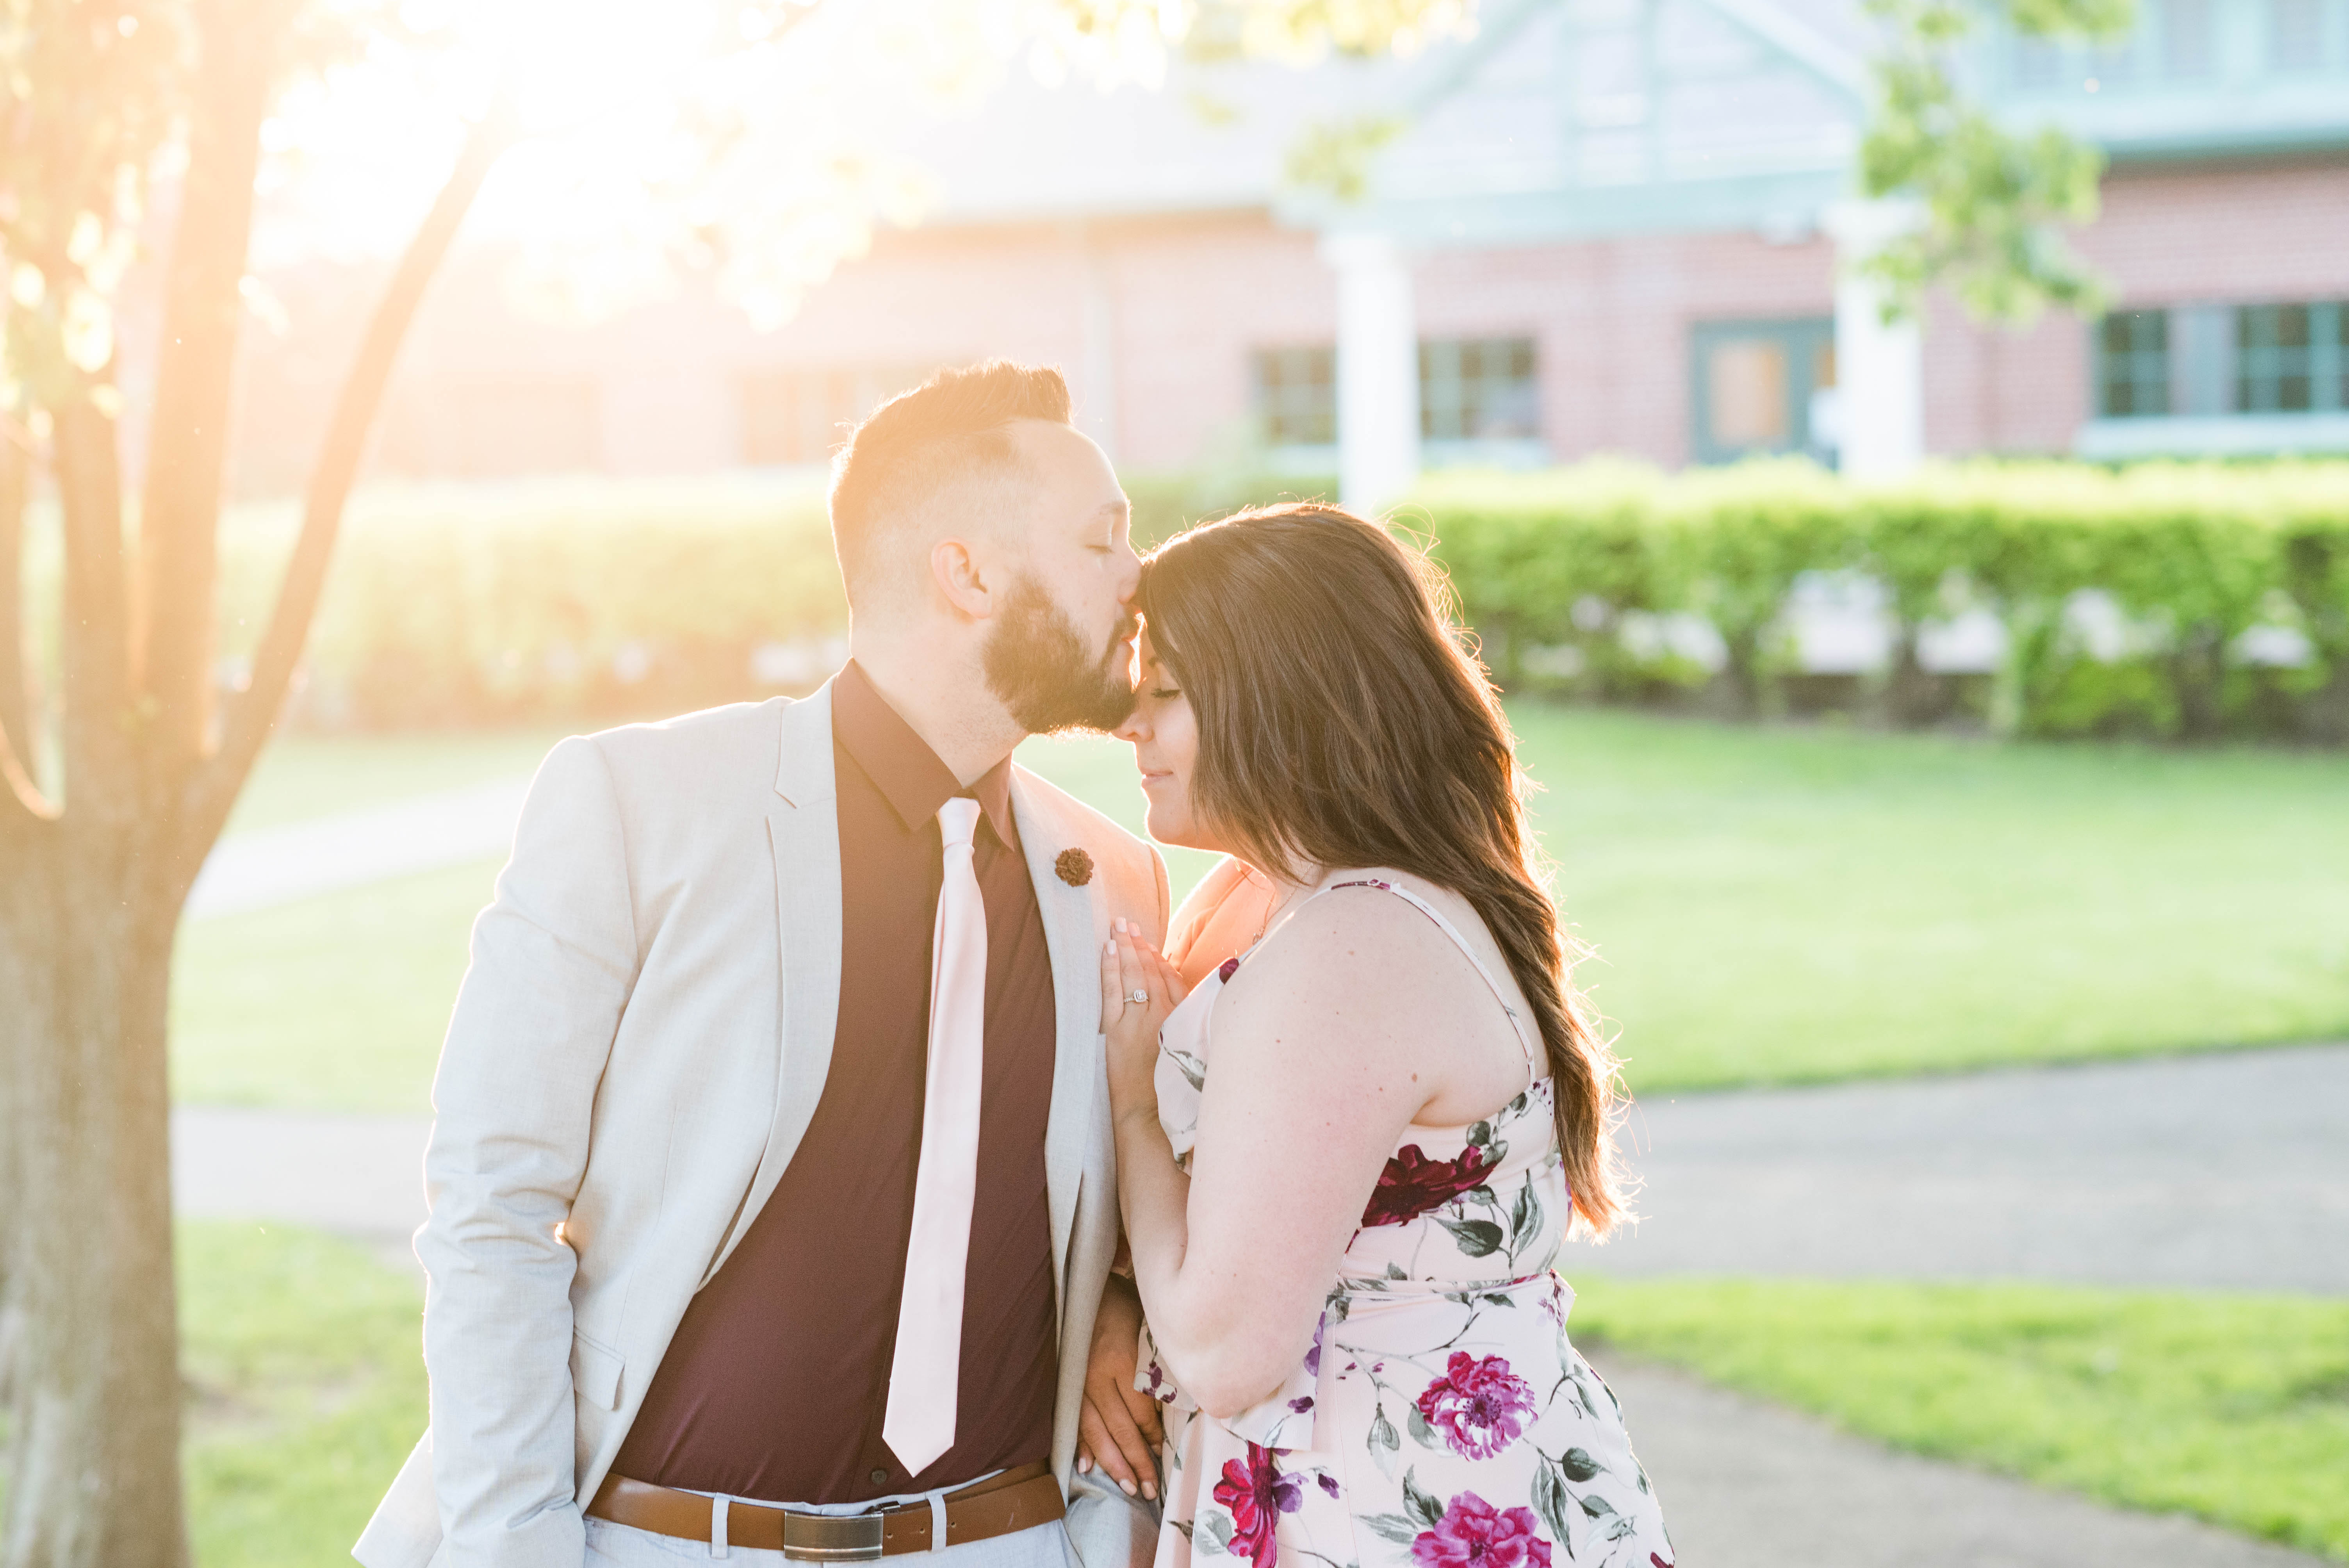 I rolled out of bed at 5:00 AM. I had already picked out my outfit, grabbed my photo gear, and headed out the door. It was still dark outside as I was driving to Schiller Park in German Village. I was SO excited for this sunrise engagement session! Any couple that volunteers to have a sunrise session truly wins the heart of a wedding photographer.